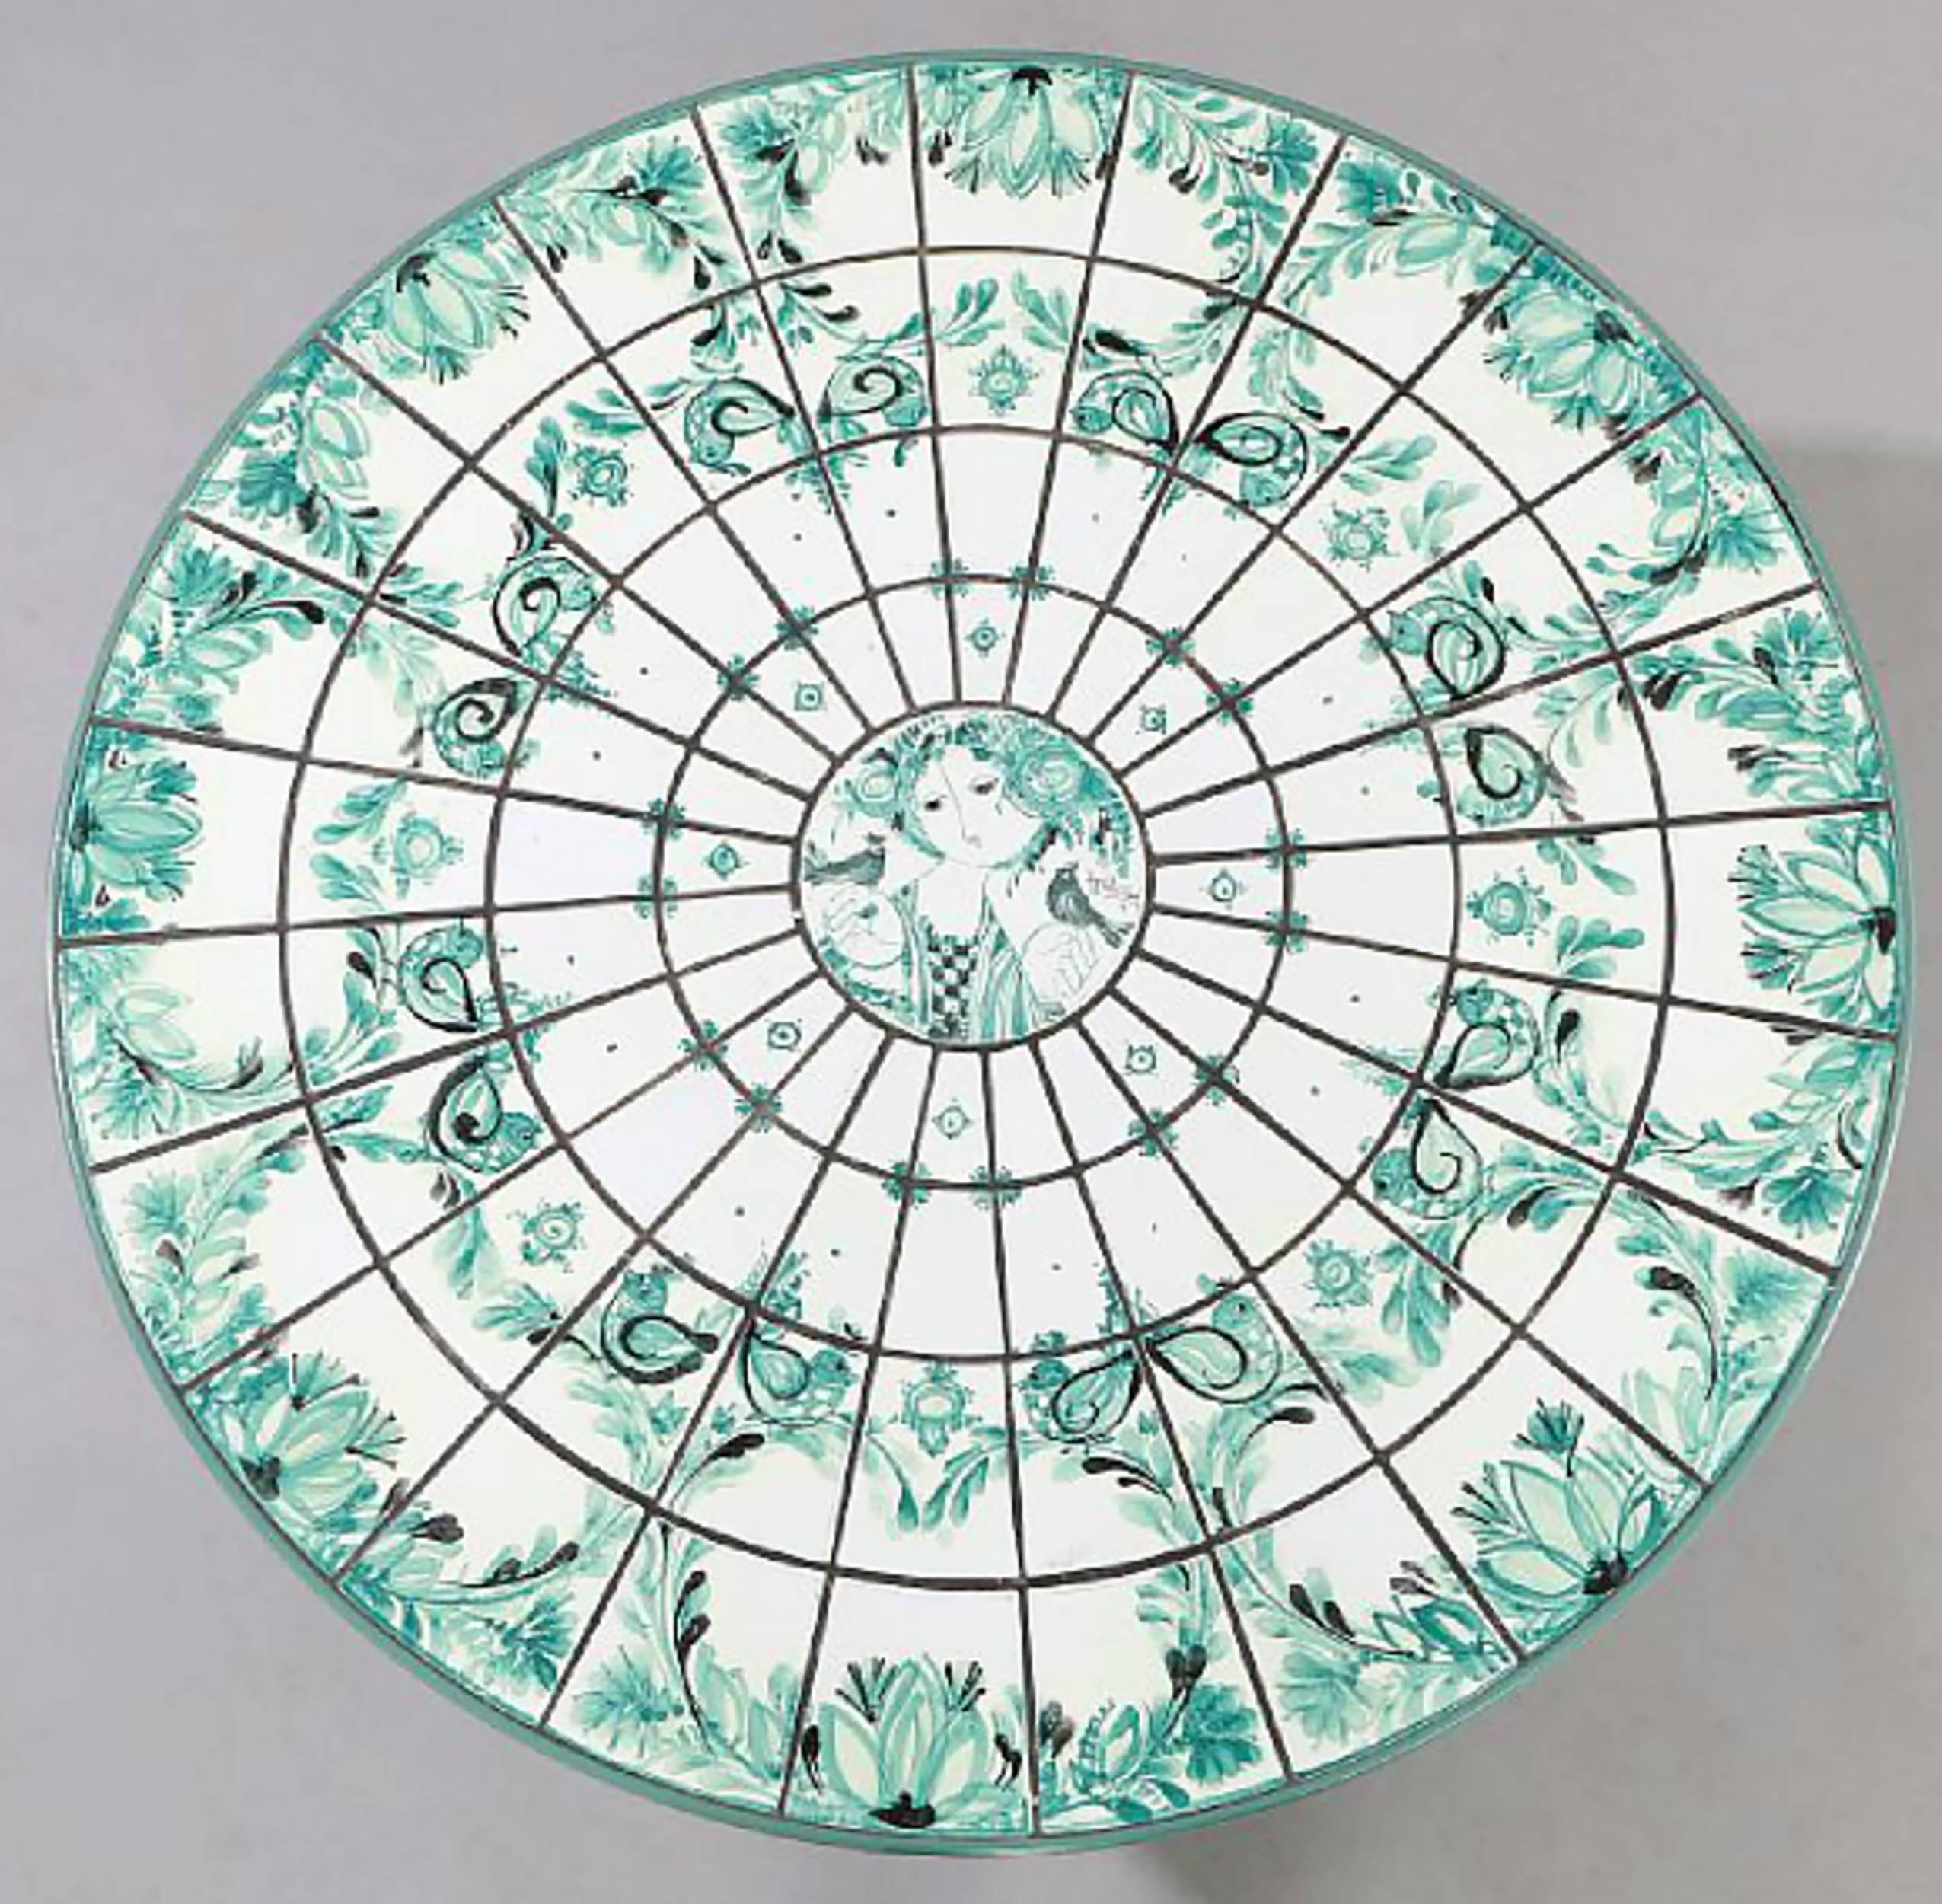 A round coffee table with hand-painted and glazed ceramic tiles, signed Bjorn Wiinblad. Frame in turquoise lacquered wood, Denmark, late 1970s.